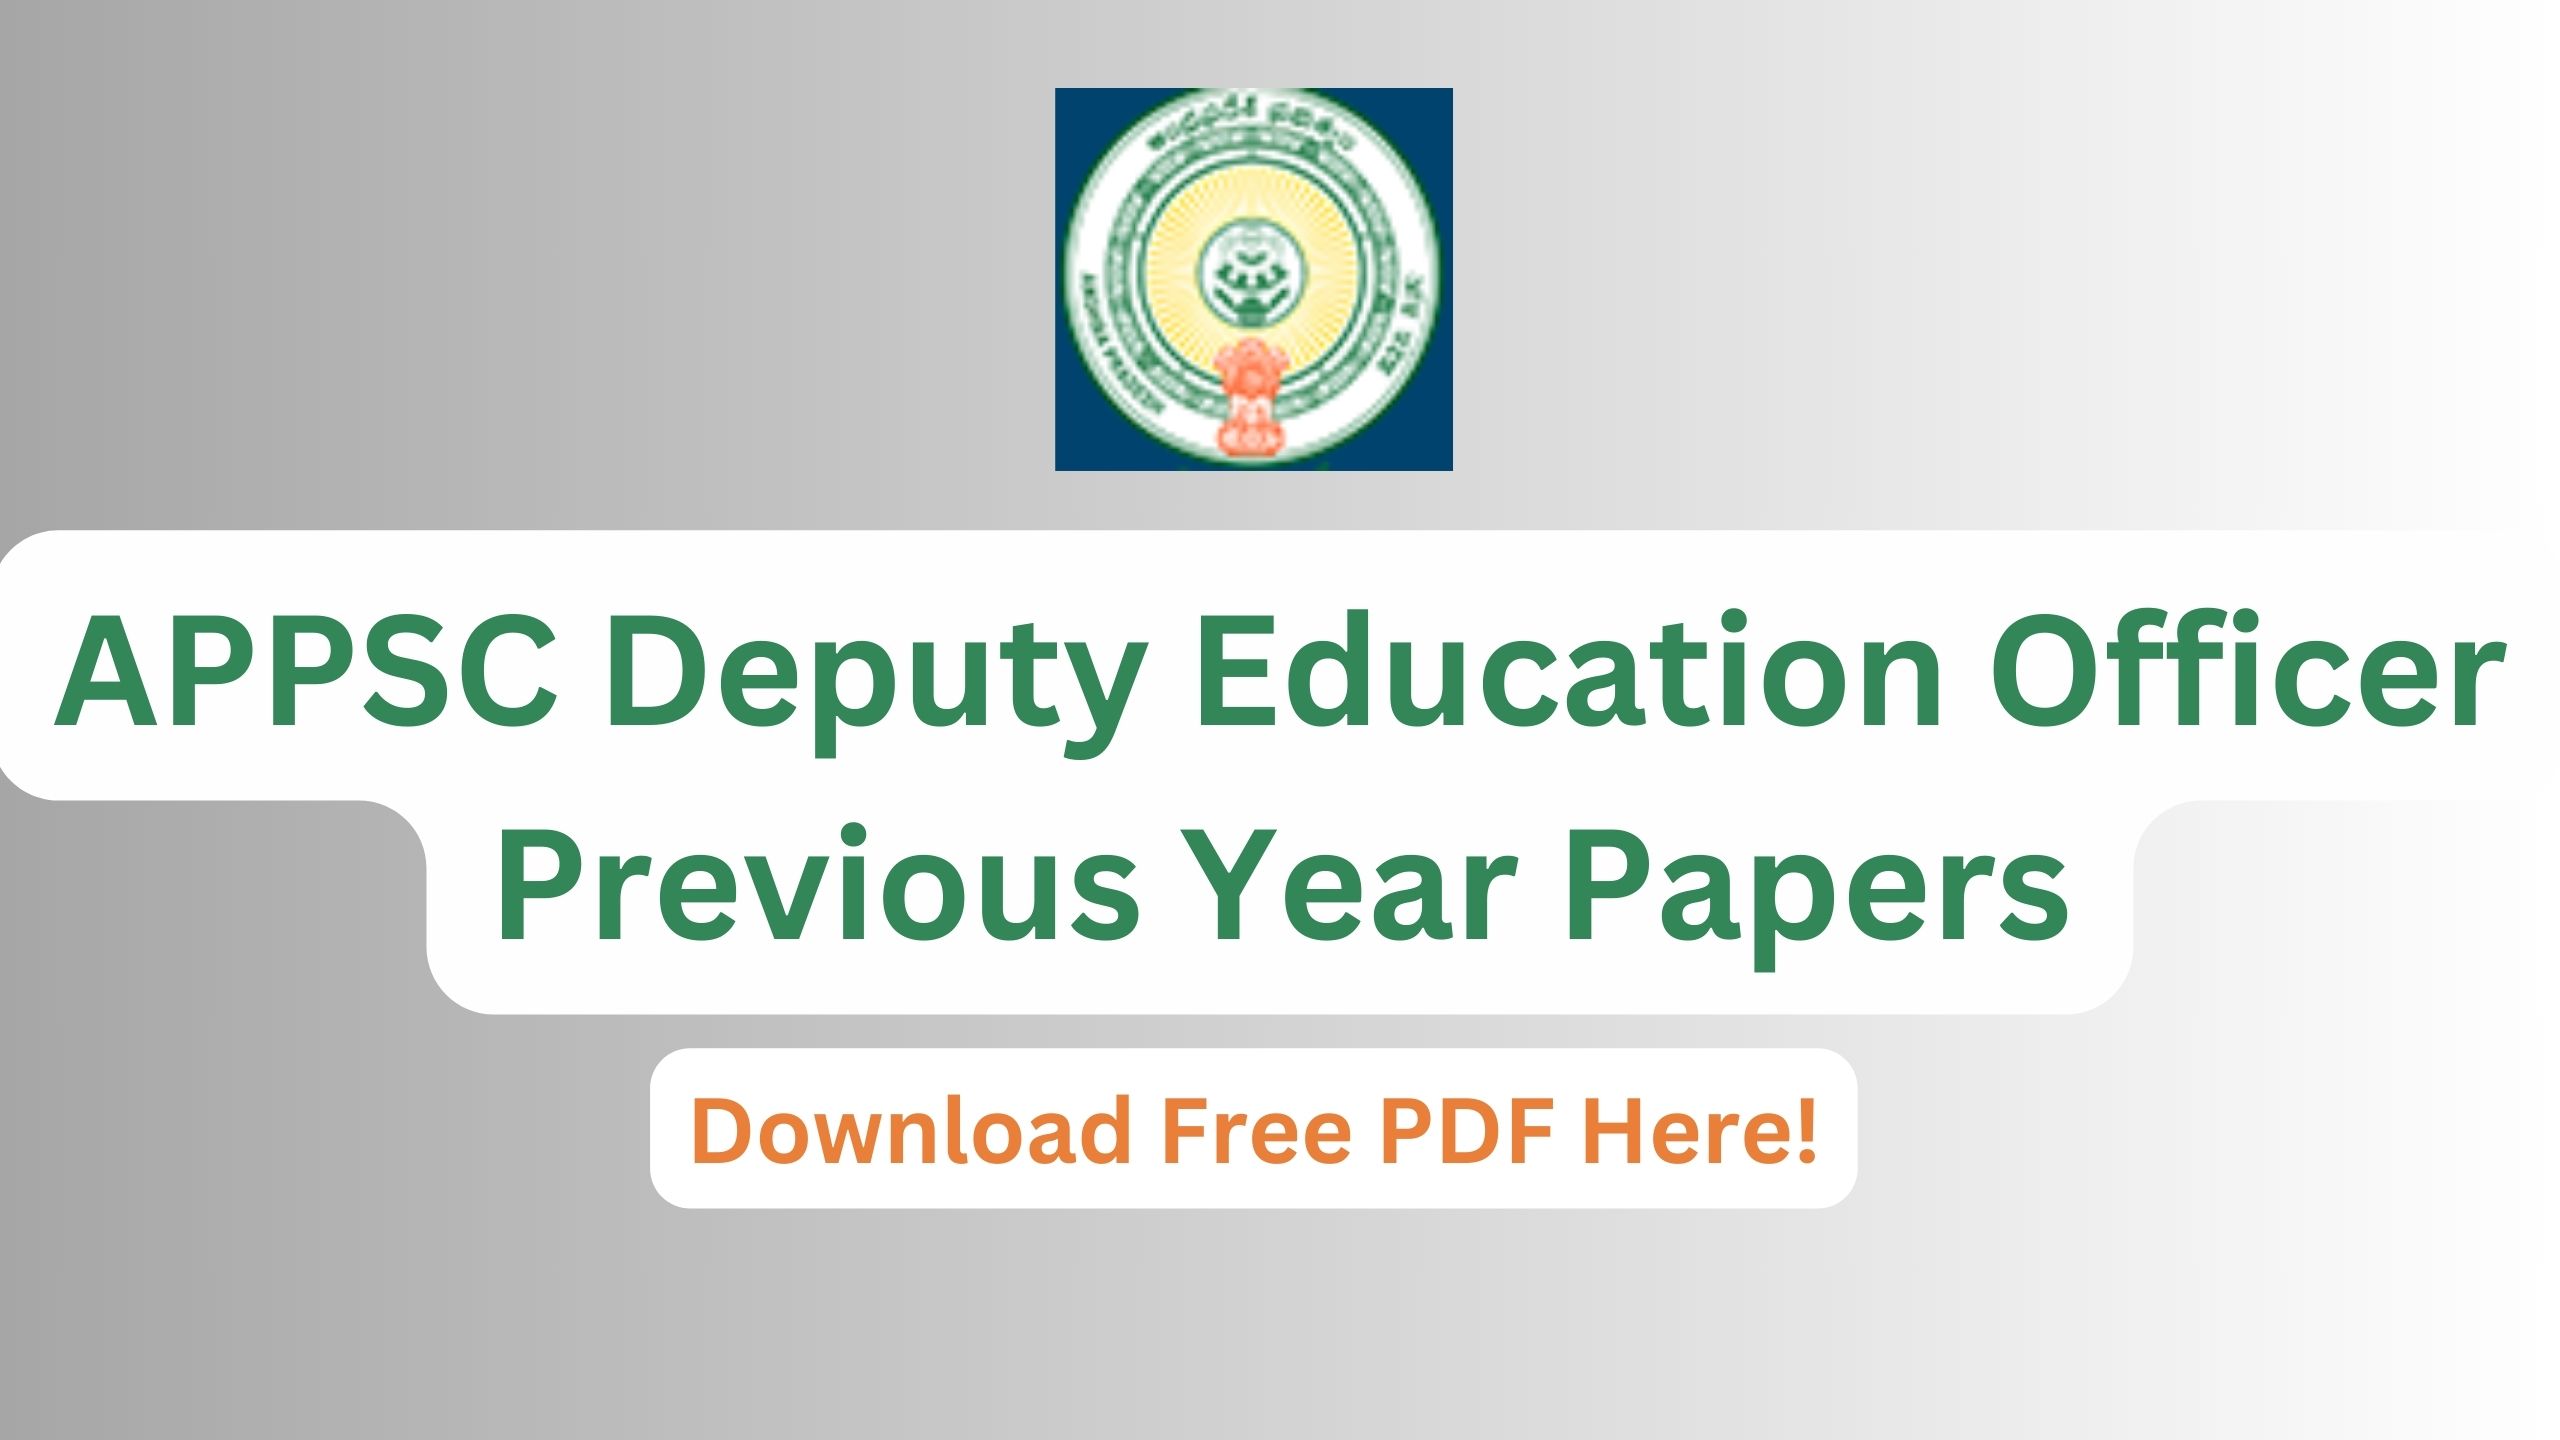 APPSC Deputy Education Officer Previous Year Papers, Download Old Paper!